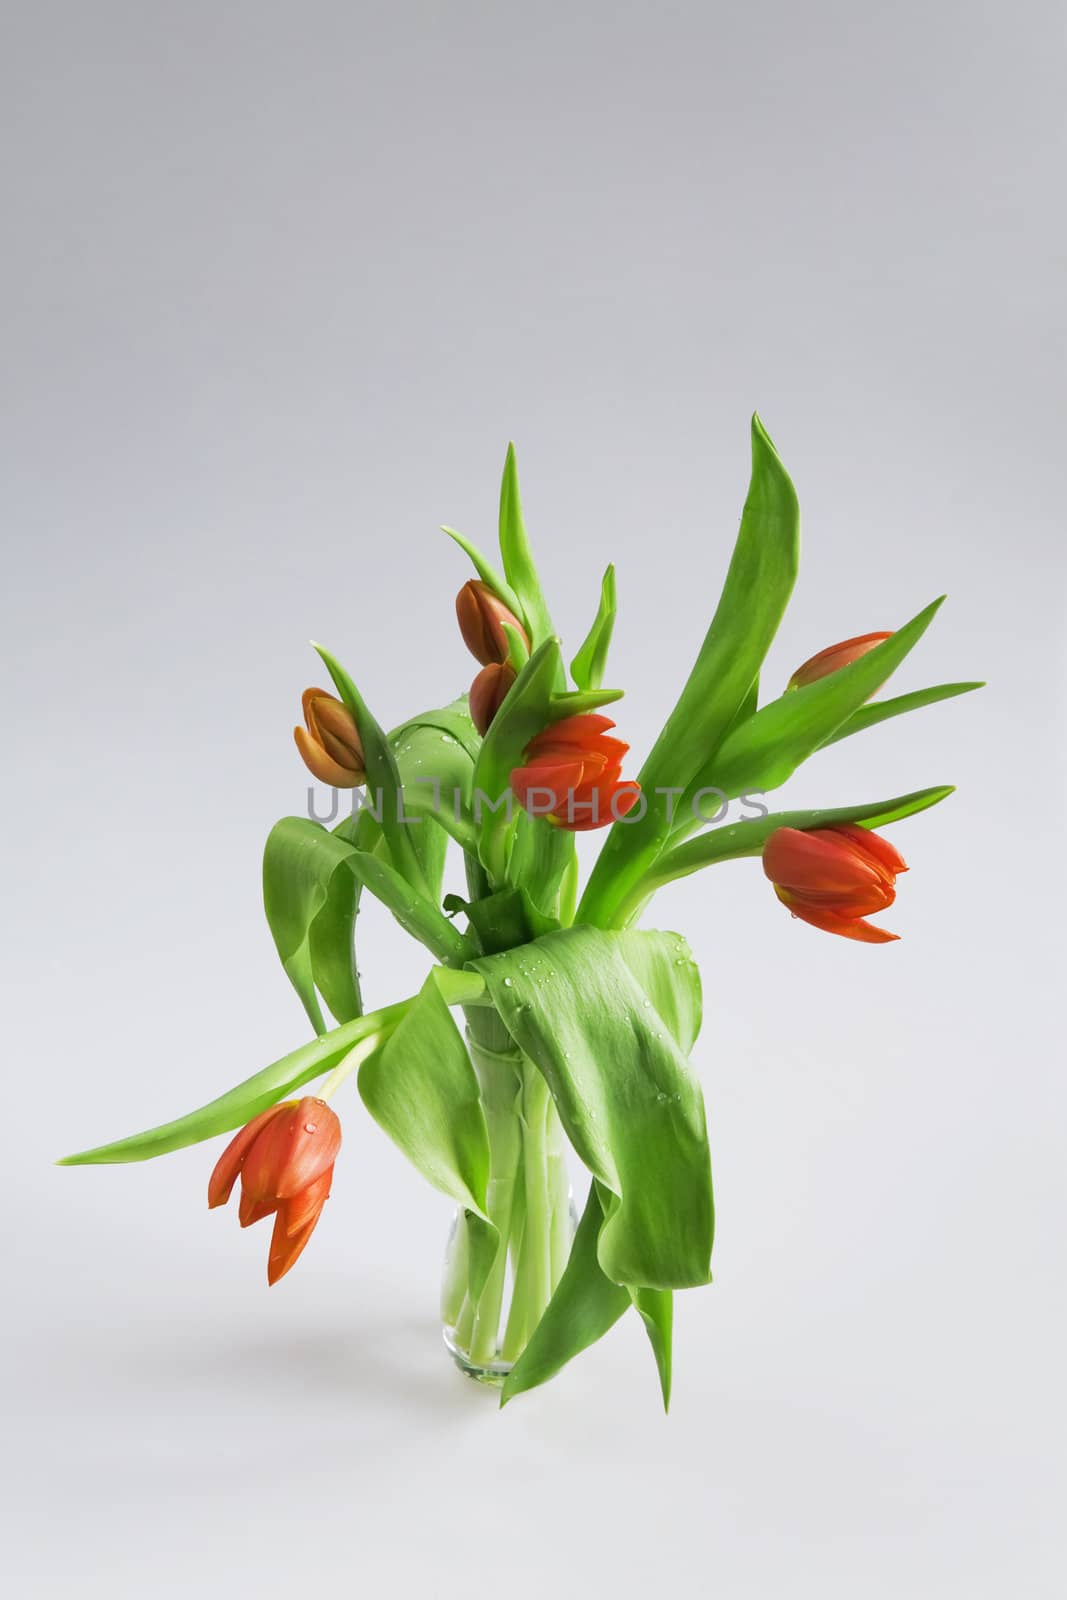 bouquet of red tulips on a white background by Serp